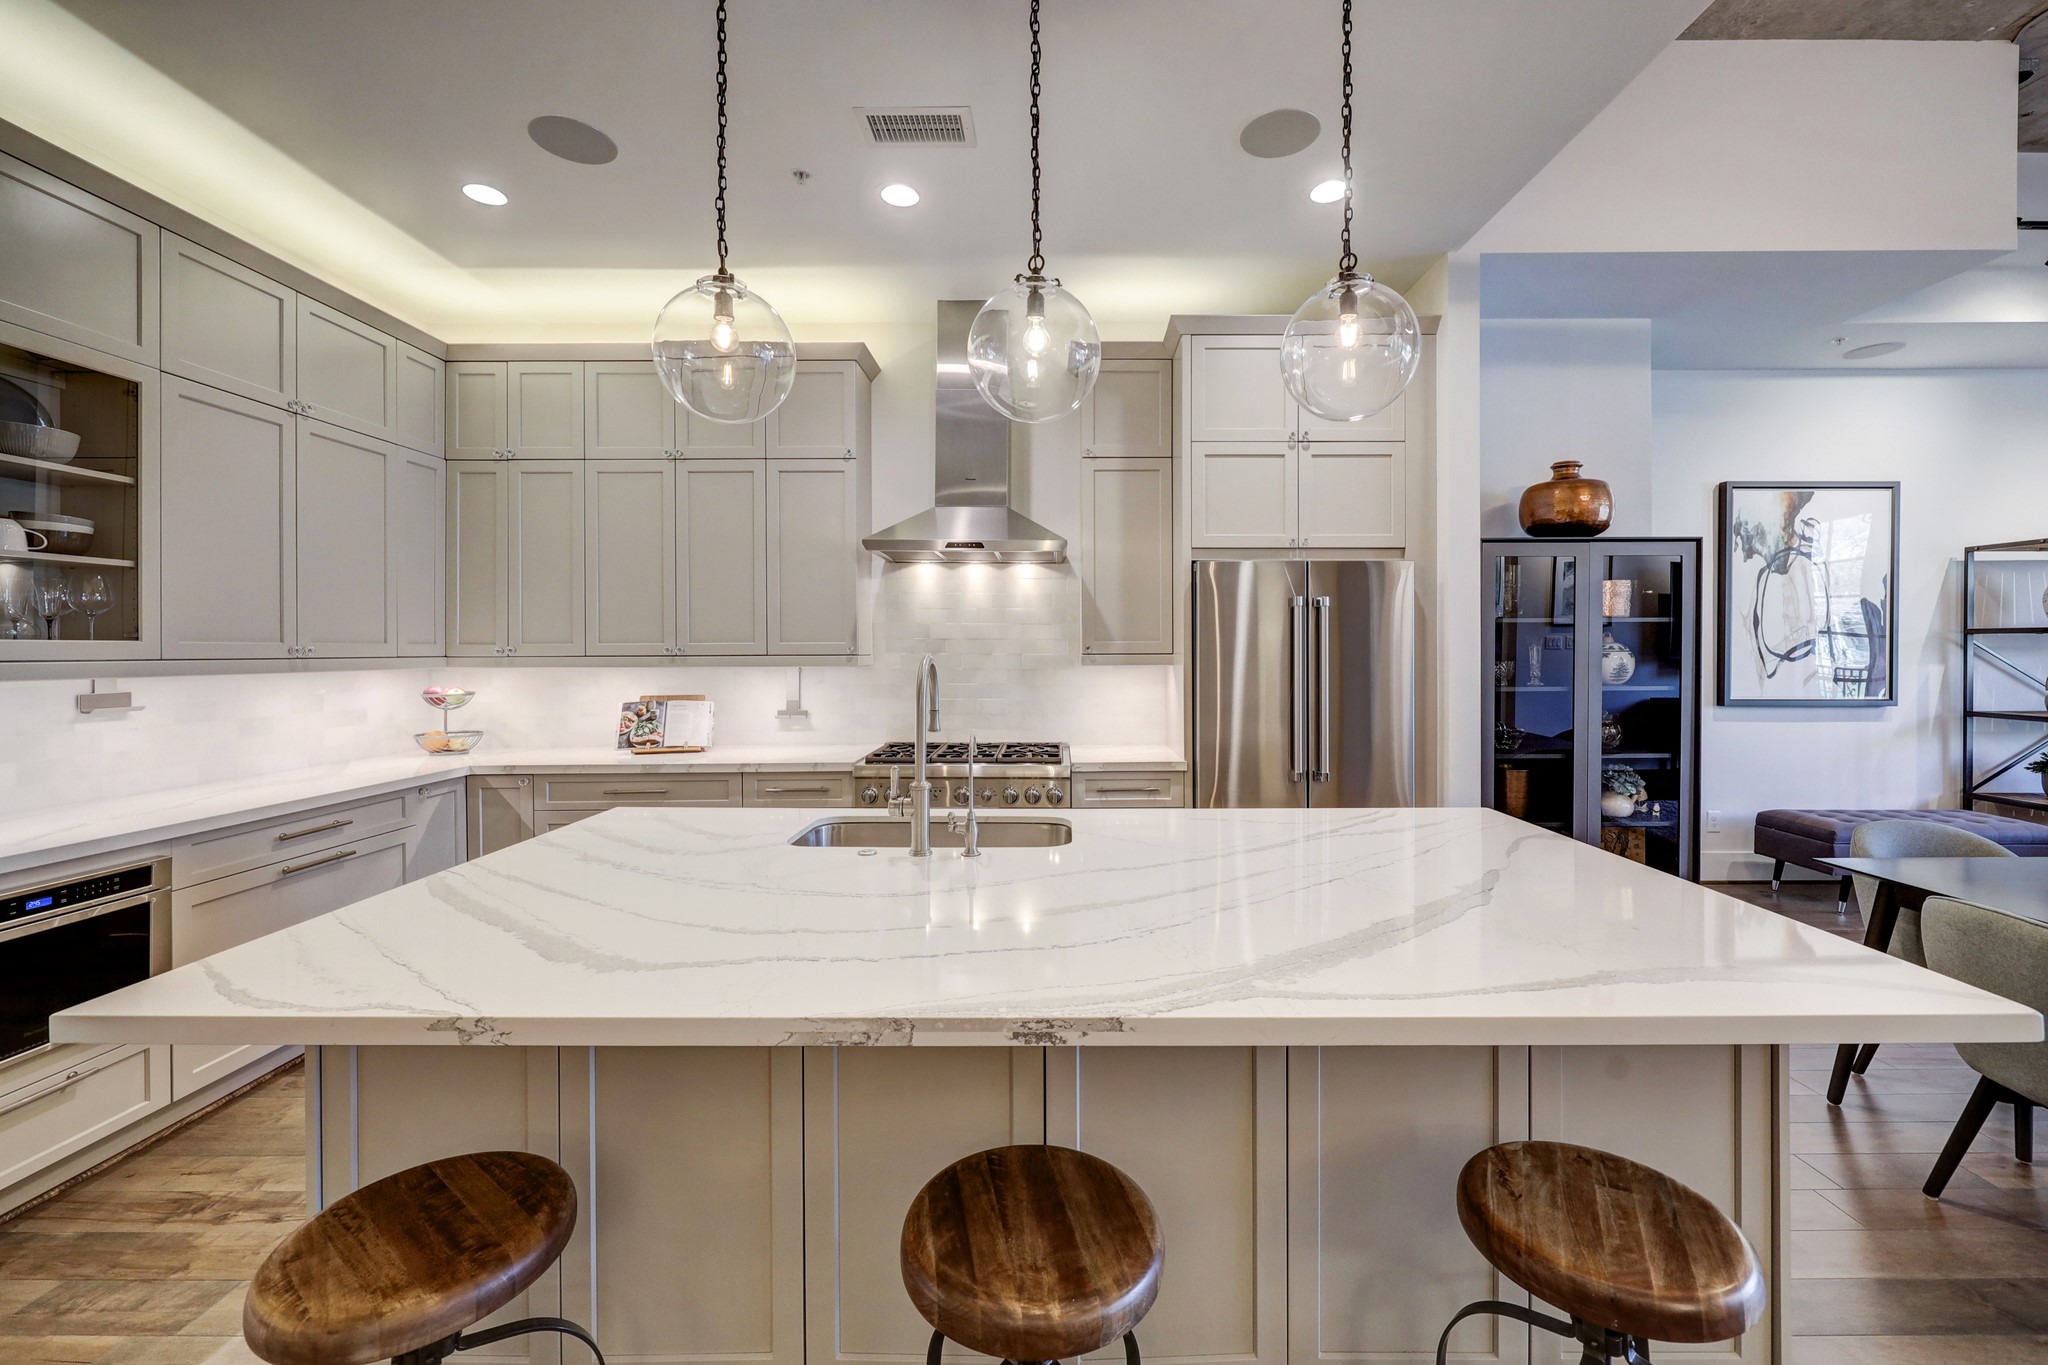 Cook your favorite meals in this chef inspired kitchen. The kitchen features Cambria quartz countertop, stylish pendants, and Thermador appliances including a professional gas range, stainless-steel vent hood, microwave and dishwasher plus a Bosch refrigerator.